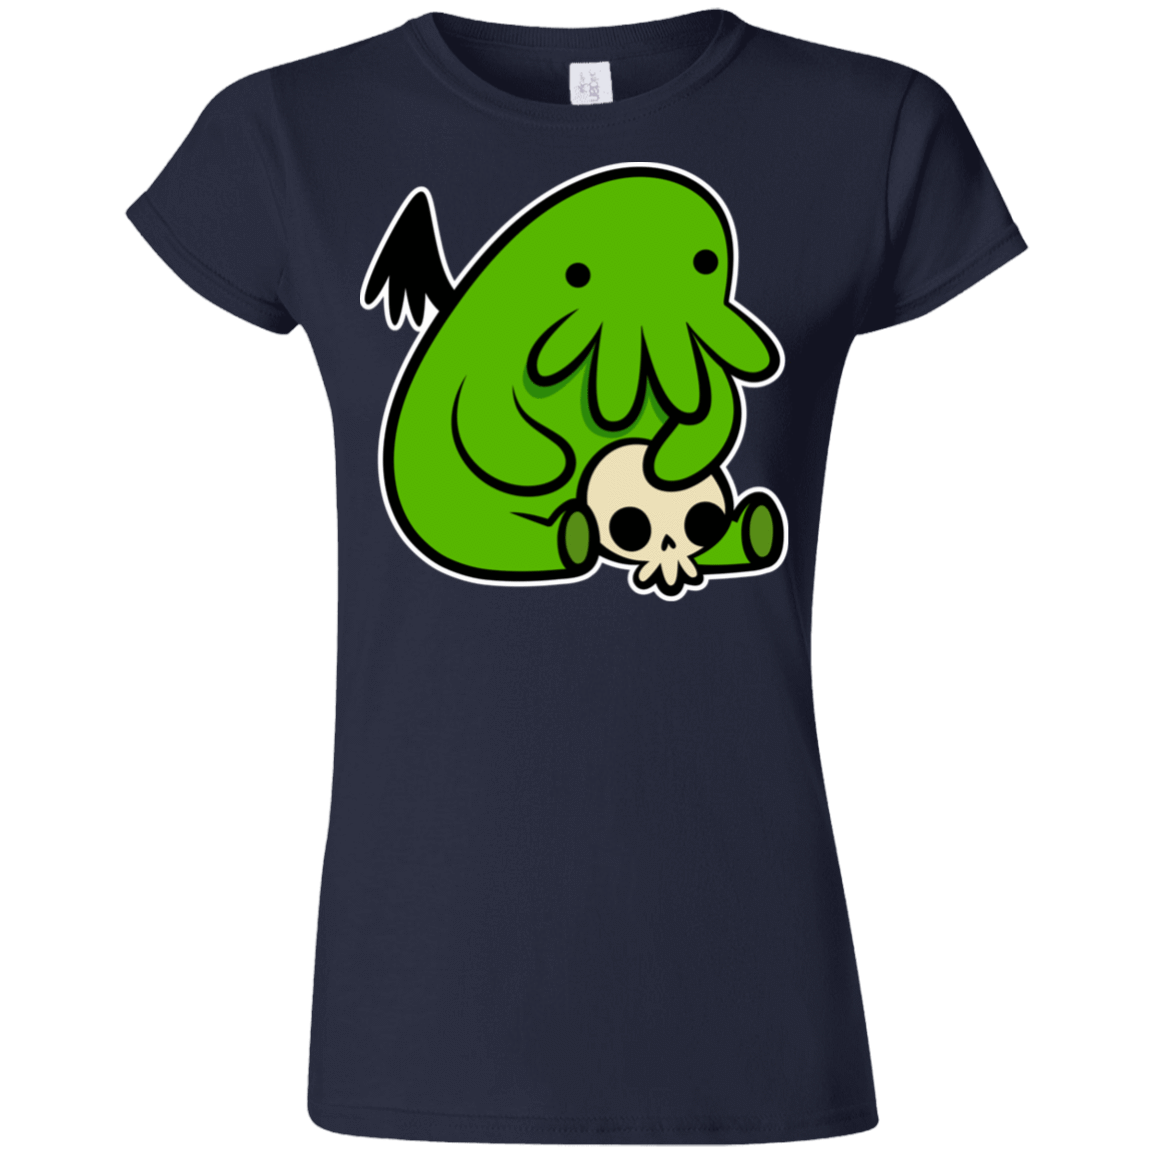 T-Shirts Navy / S Baby Cthulhu Junior Slimmer-Fit T-Shirt